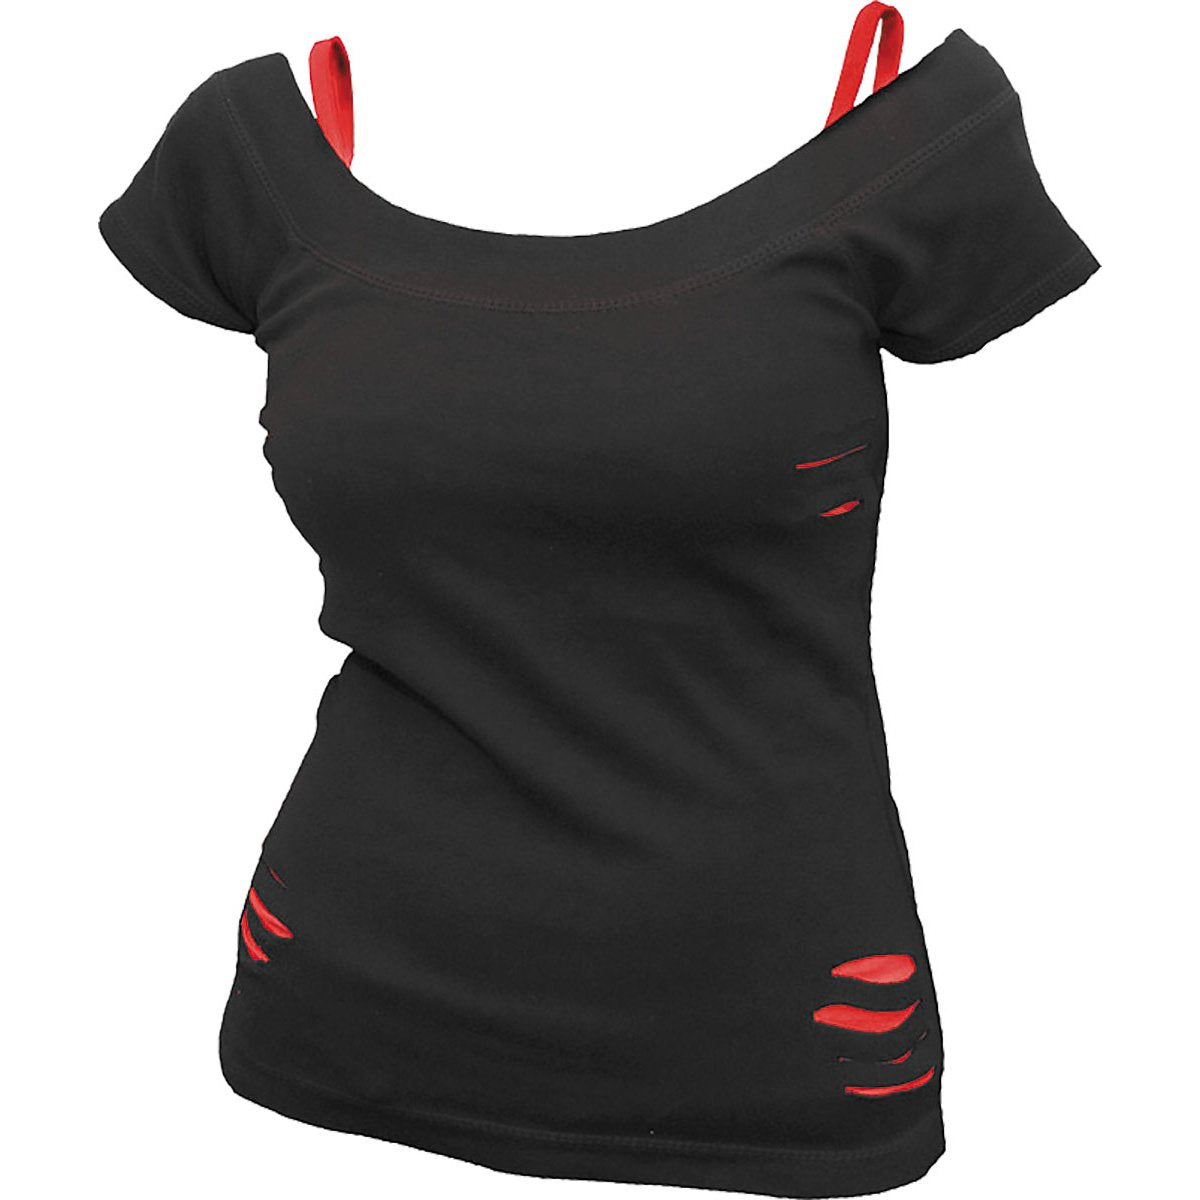 URBAN FASHION - 2in1 Red Ripped Top Black - Spiral USA